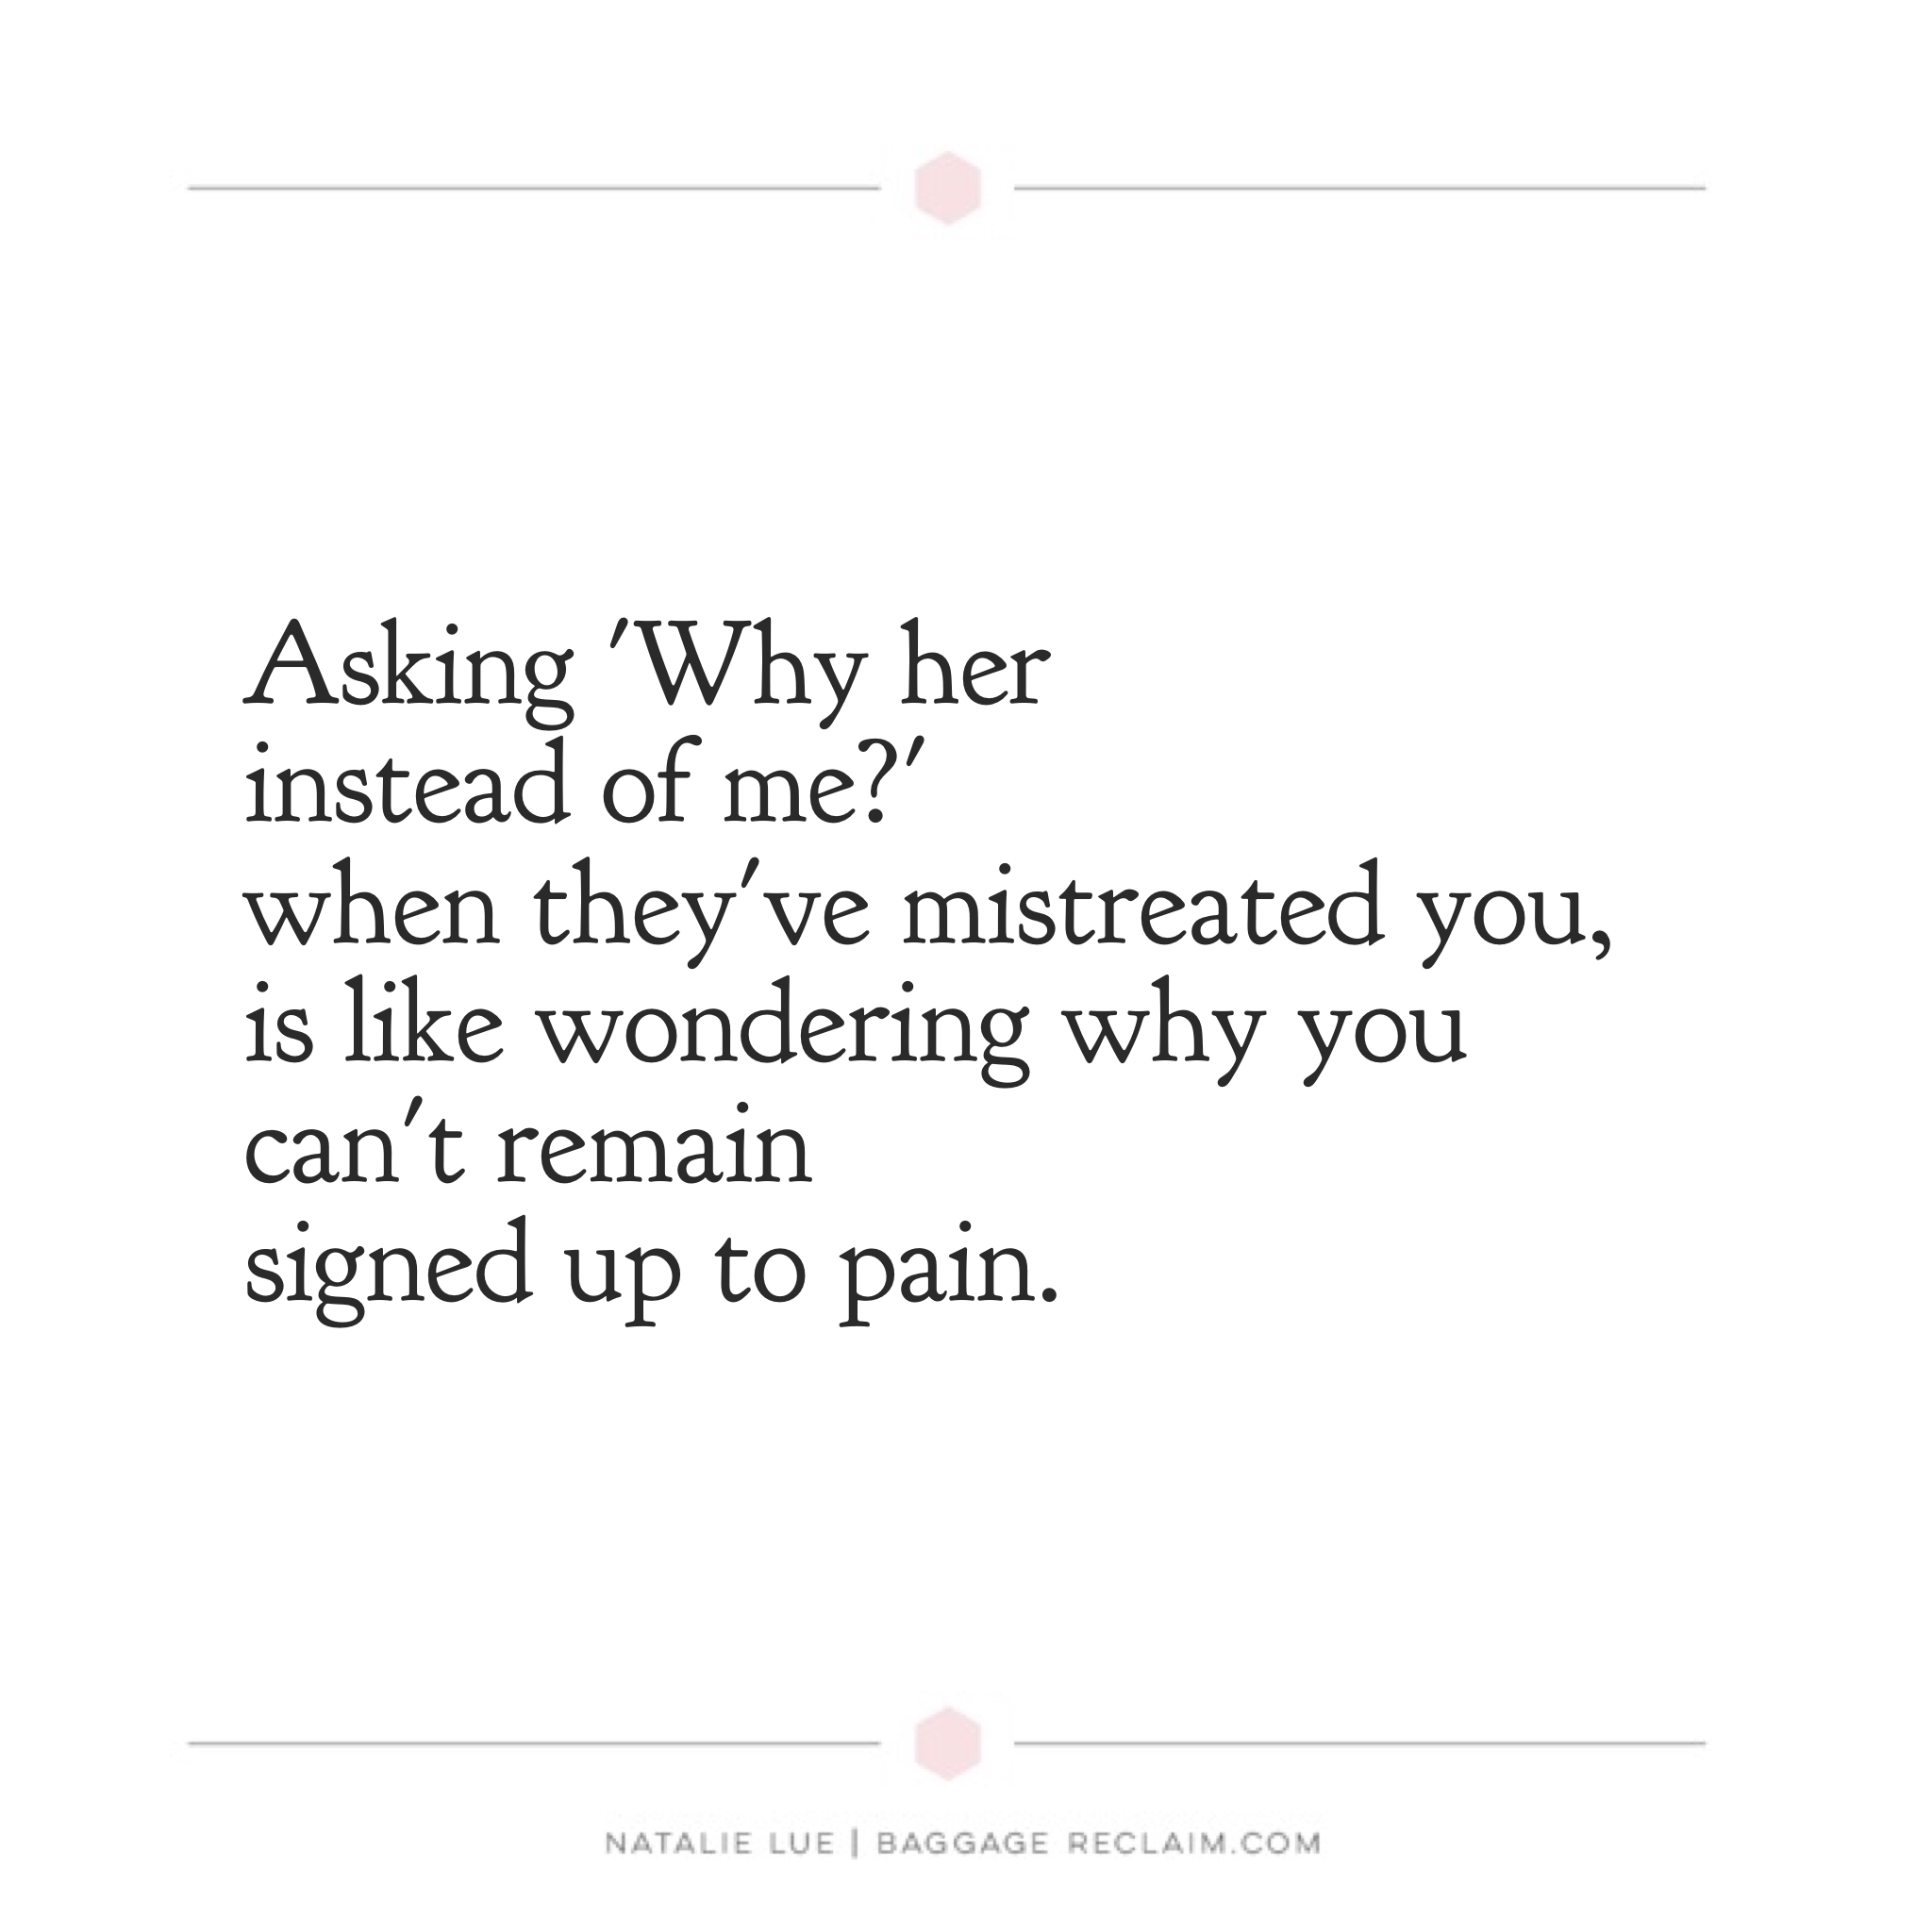 Asking 'why her instead of me' when they've mistreated you, is like wondering why you can't remain signed up to pain